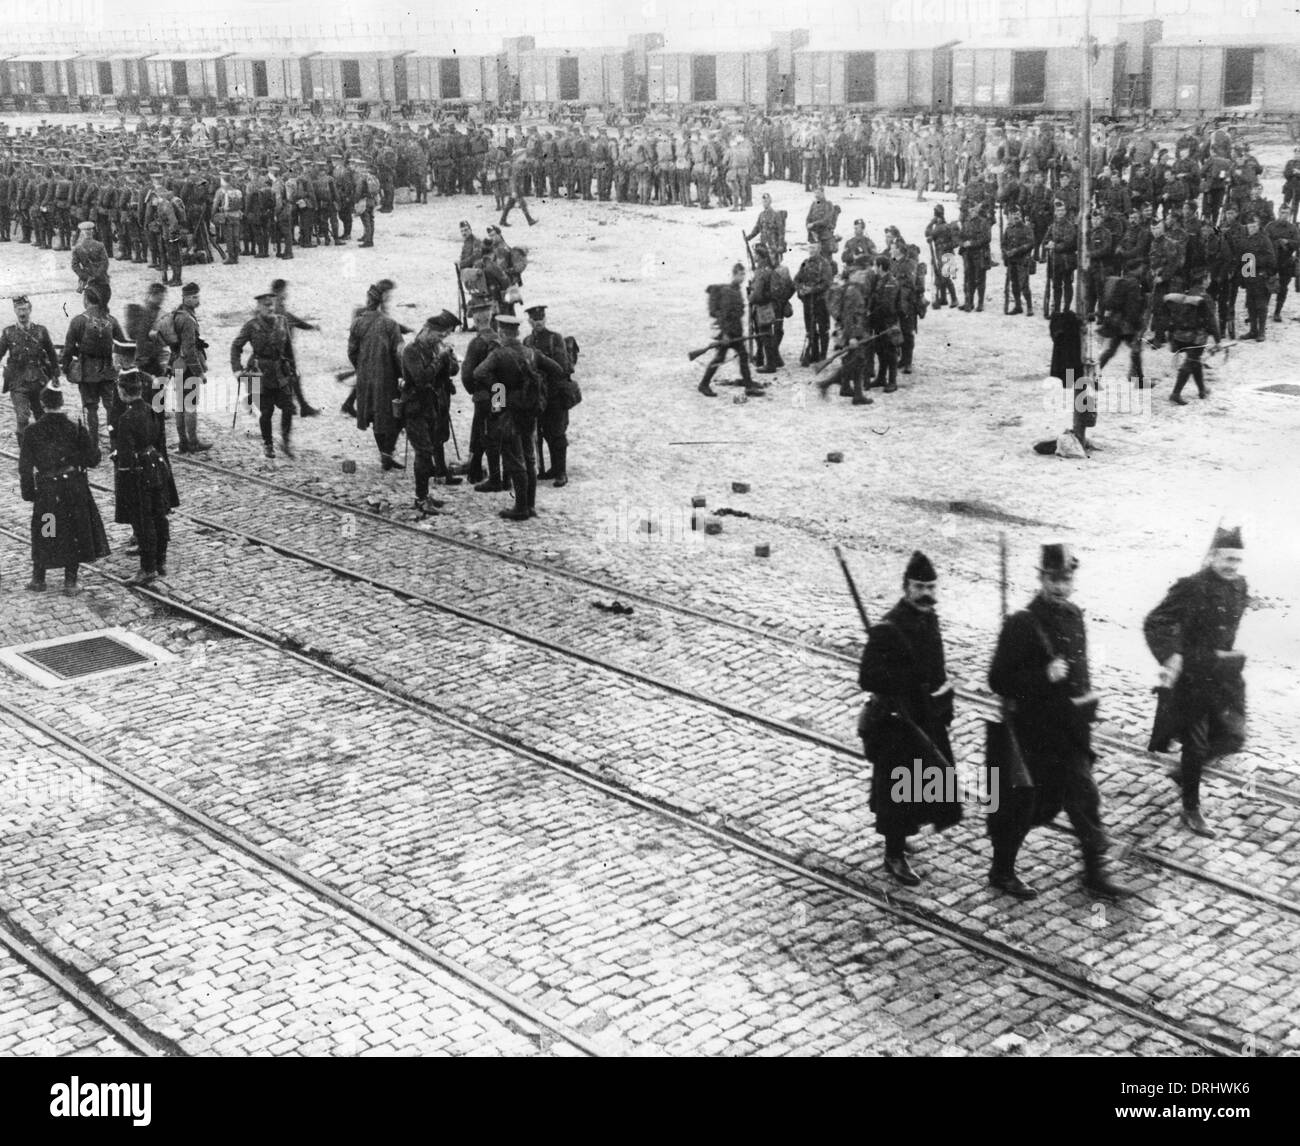 7th Division and others, Zeebrugge, Belgium, WW1 Stock Photo